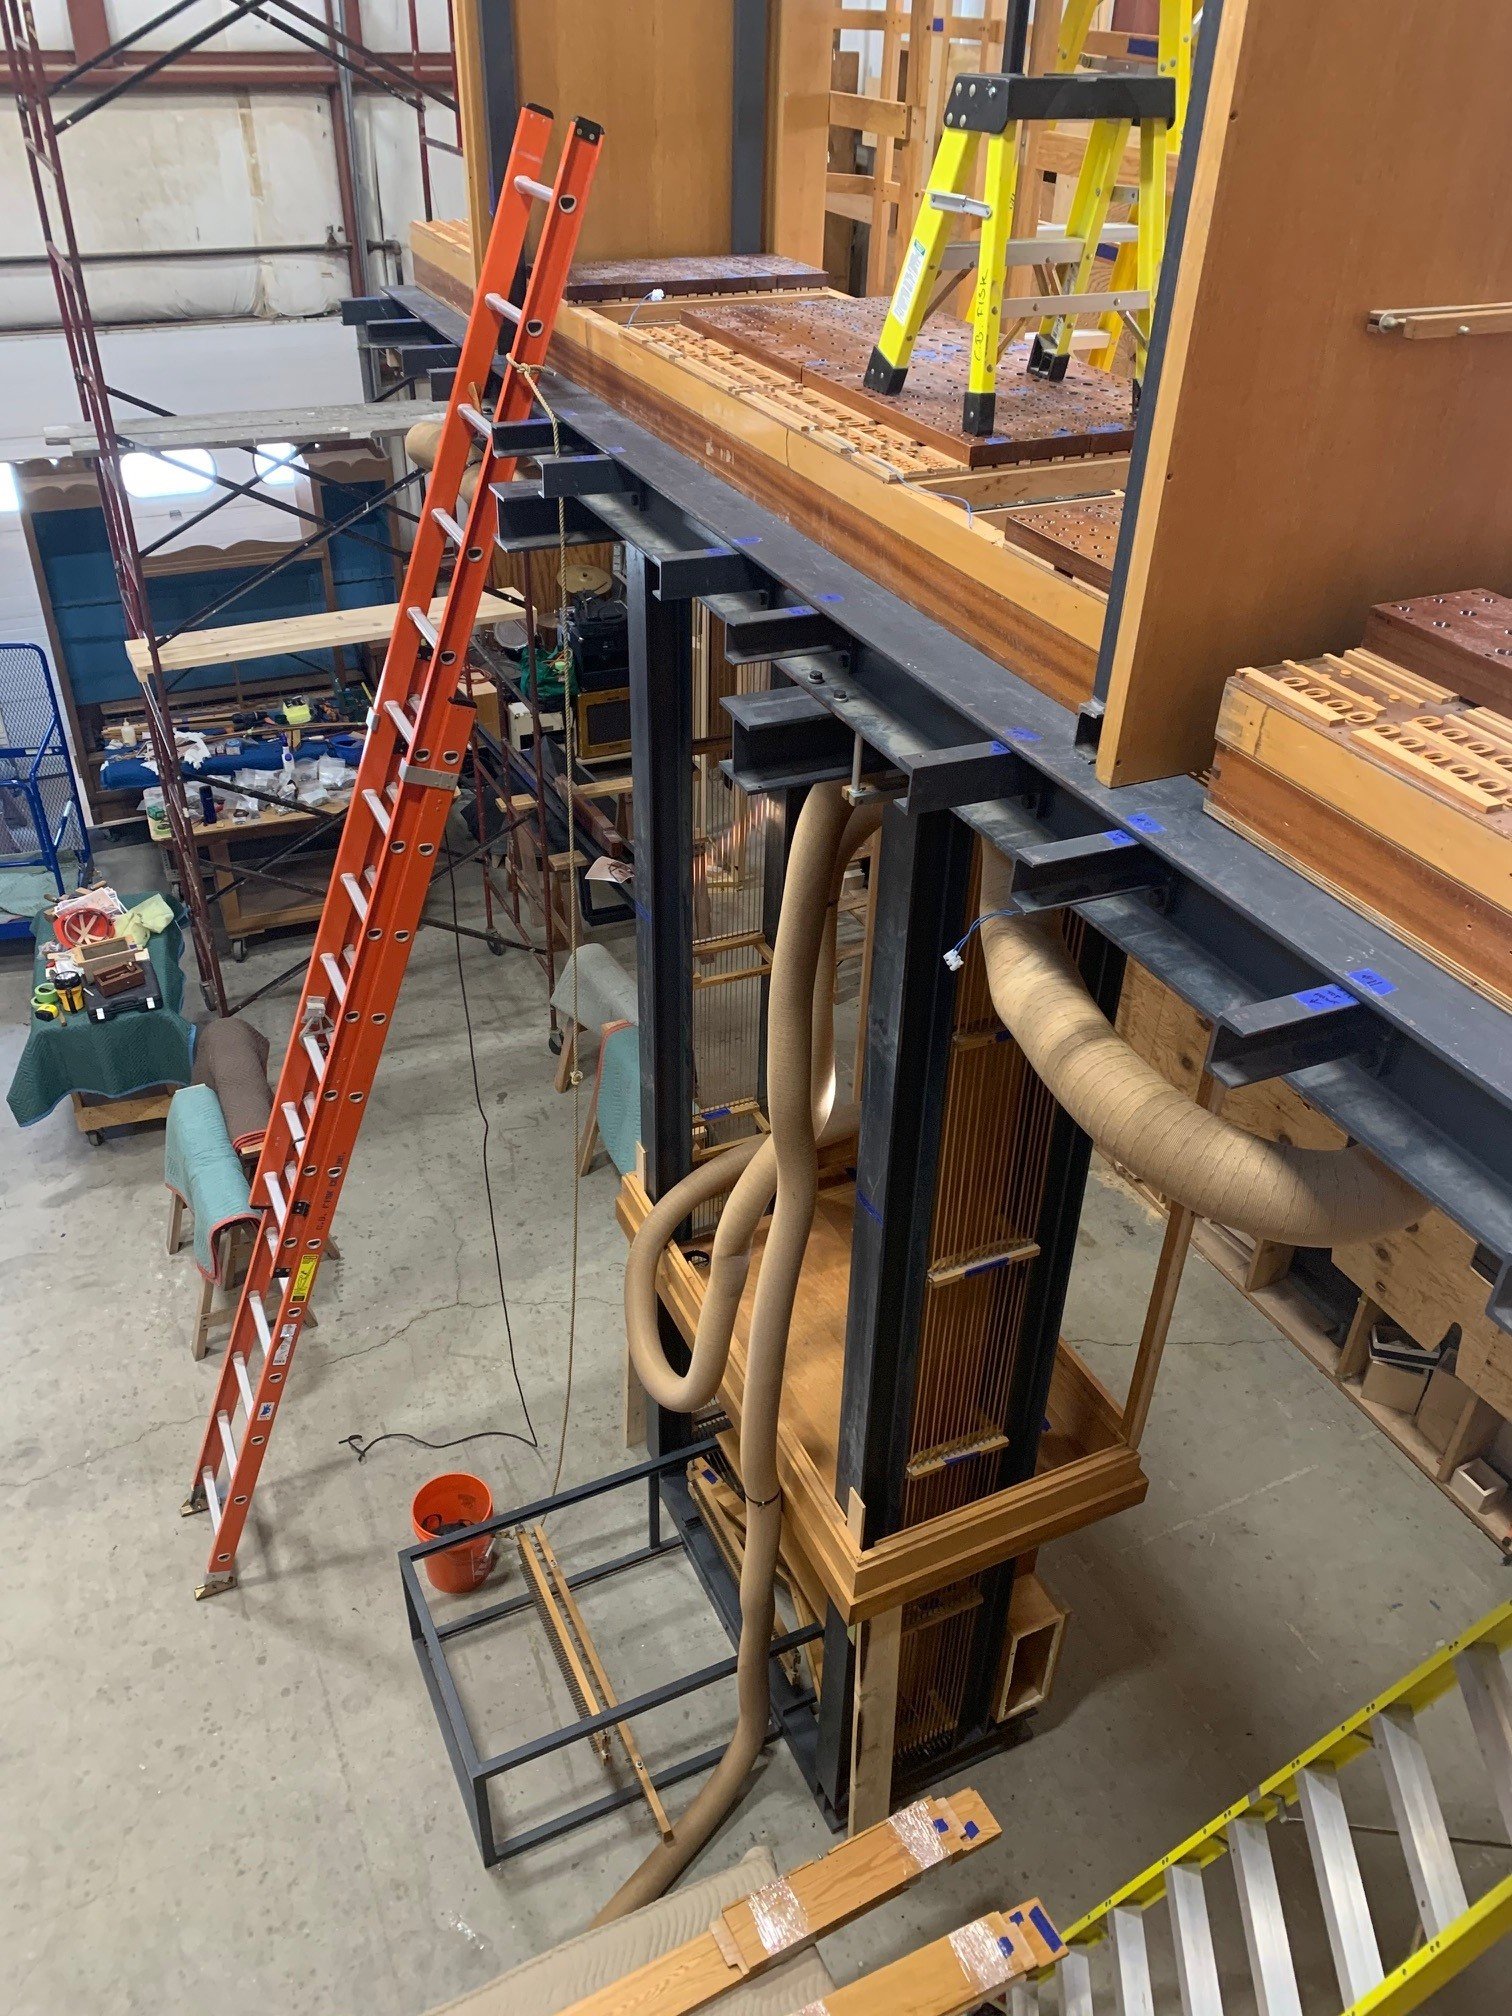   REASSEMBLY AND ASSESSMENT    May 2021   As more of the organ is reconstructed at C.B.Fisk, it becomes clearer how it will eventually be reinstalled at Saint Peter’s. The beginnings of the wooden case are shown here, as well as the wind chests. The 